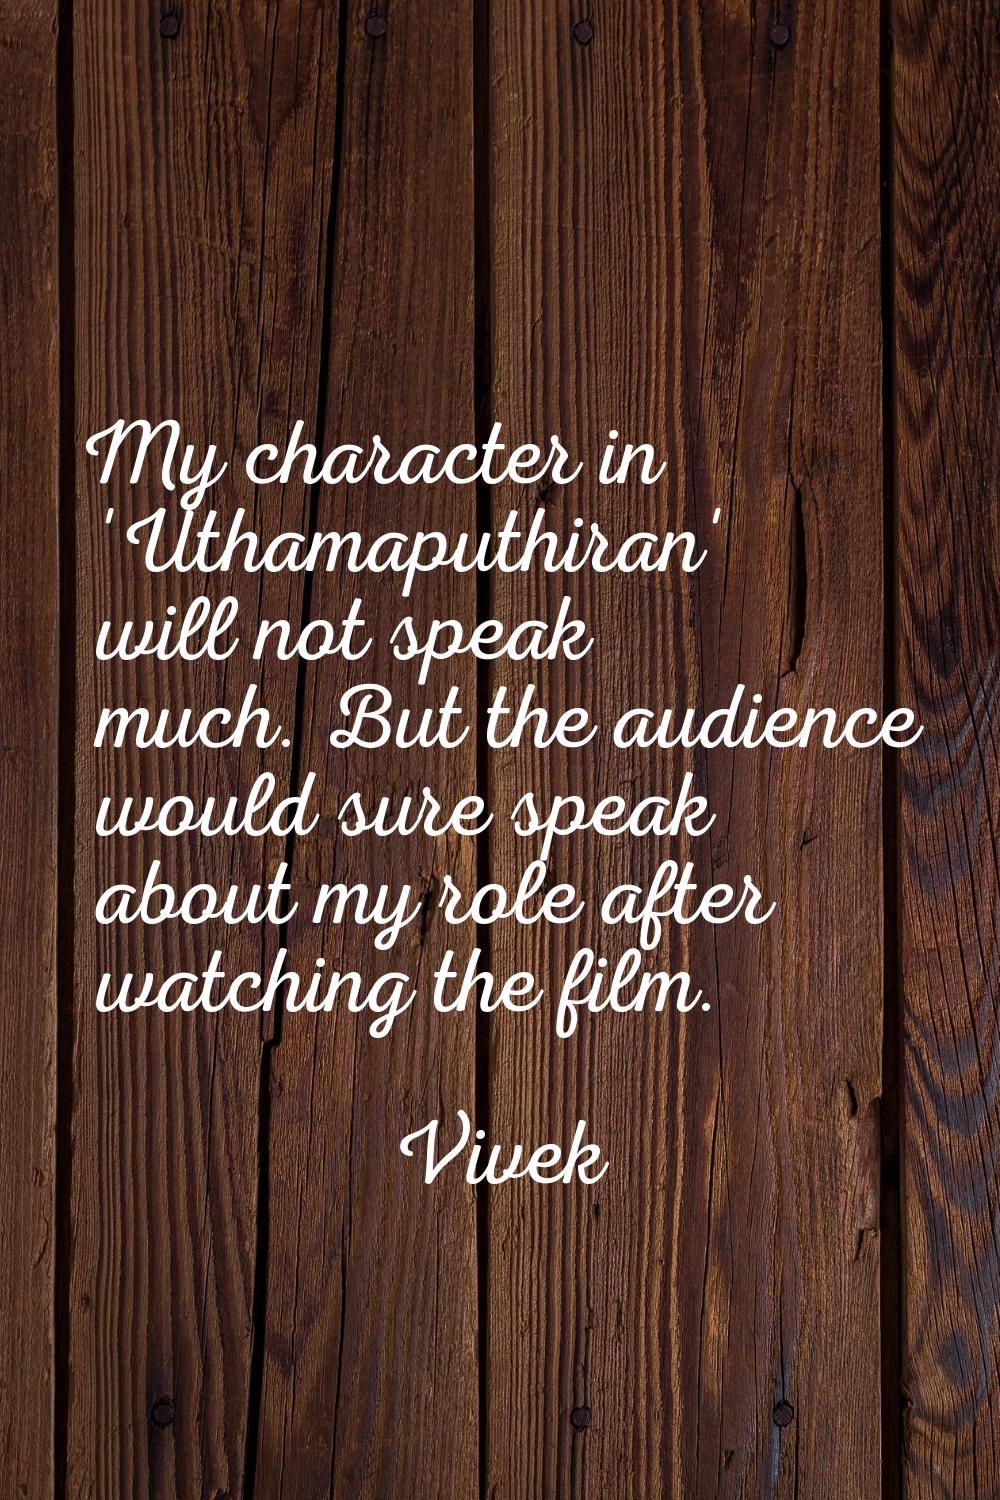 My character in 'Uthamaputhiran' will not speak much. But the audience would sure speak about my ro